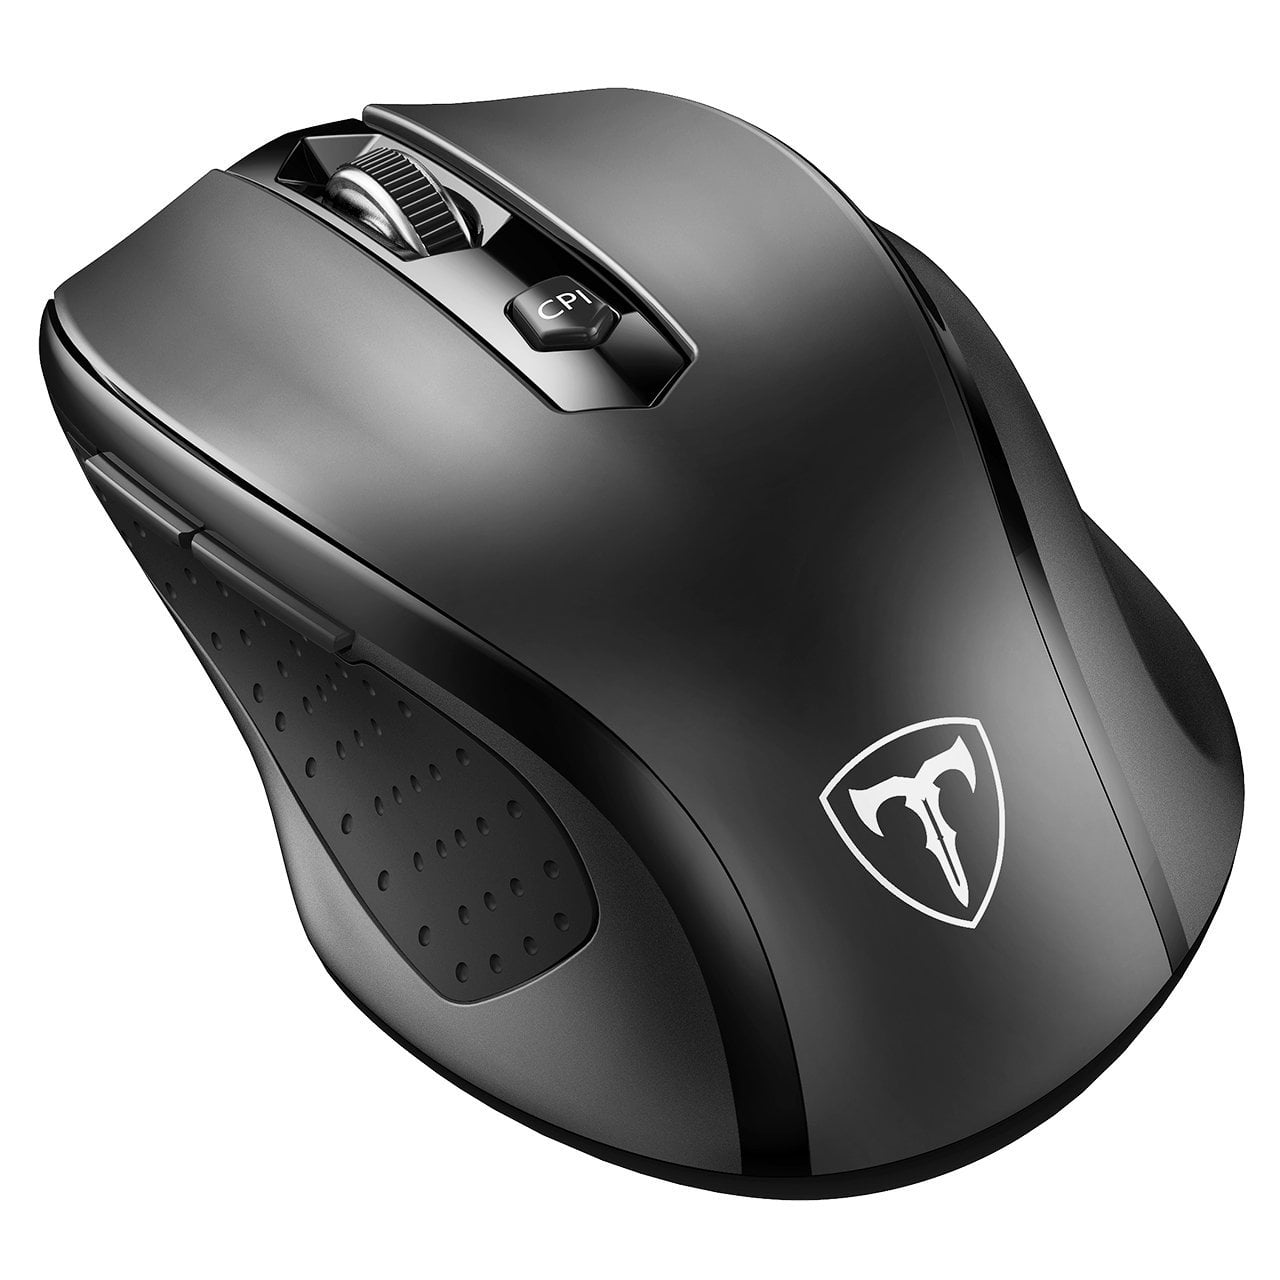 Mac Wireless Computer Mouse 1600DPI USB Optical Gaming Mice Notebook Portable Computer Mice for PC Computer Silver